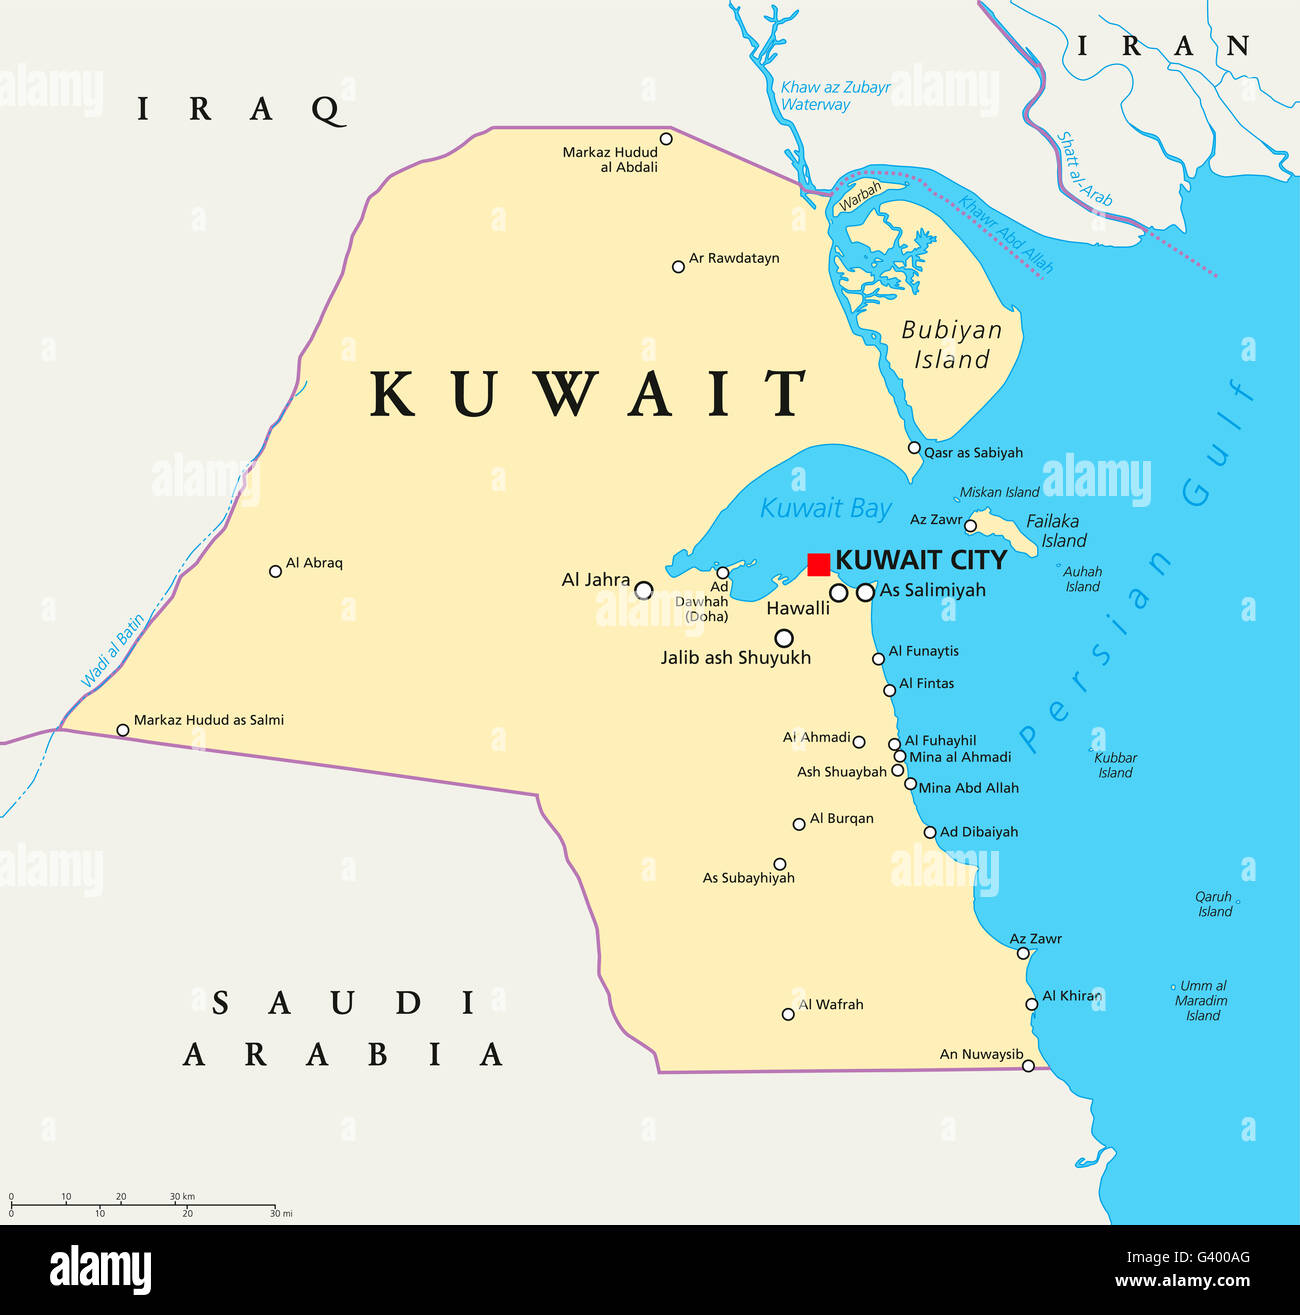 Kuwait political map with capital Kuwait City, national borders, important cities and rivers. English labeling and scaling. Stock Photo